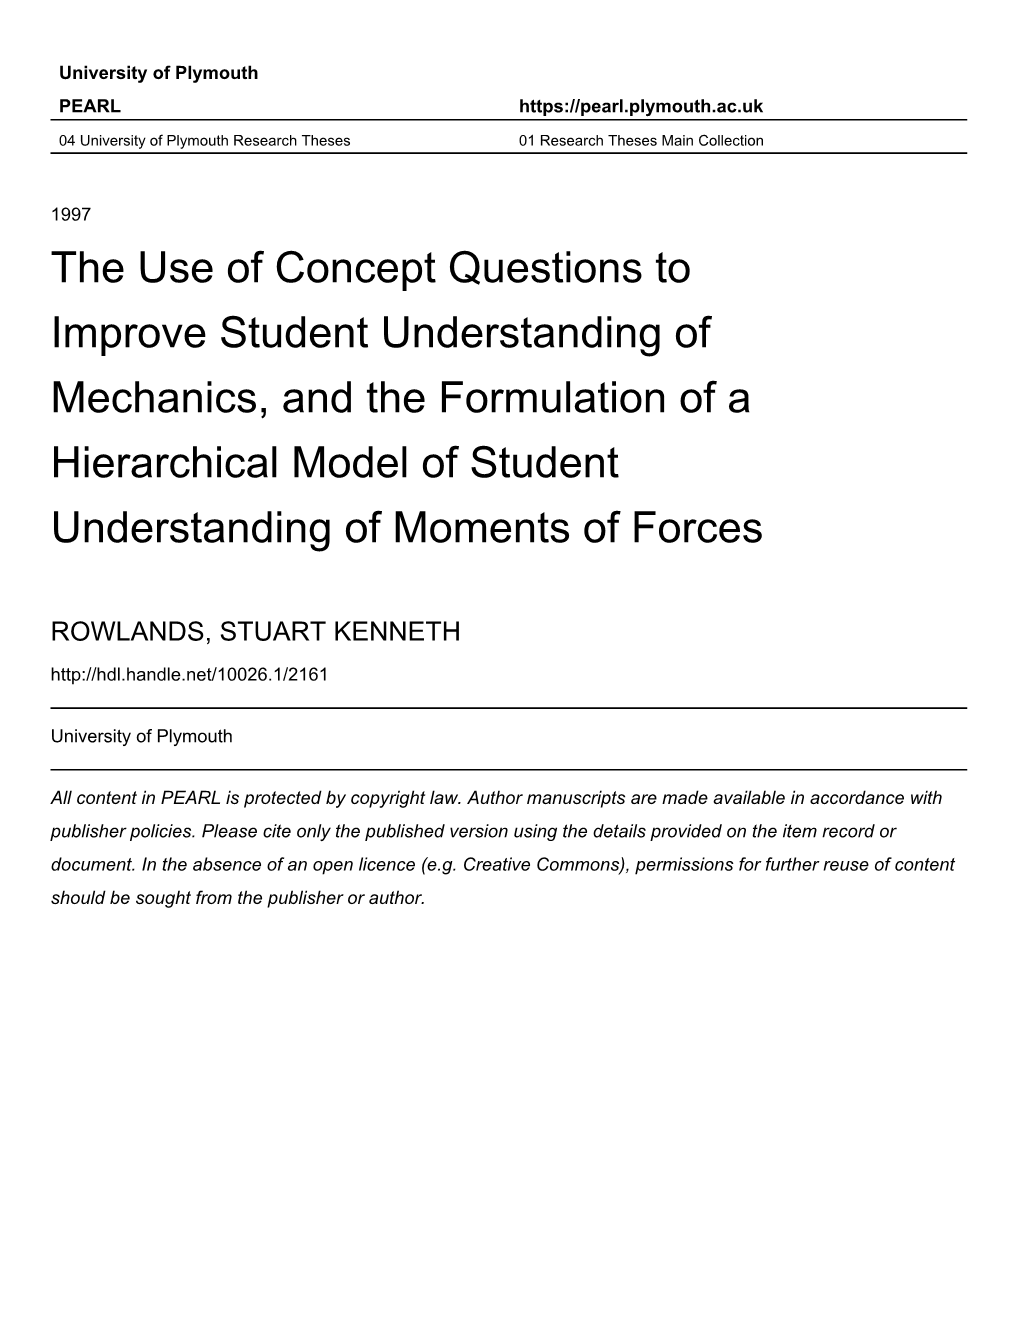 The Use of Concept Questions to Improve Student Understanding of Mechanics, and the Formulation of a Hierarchical Model of Student Understanding of Moments of Forces